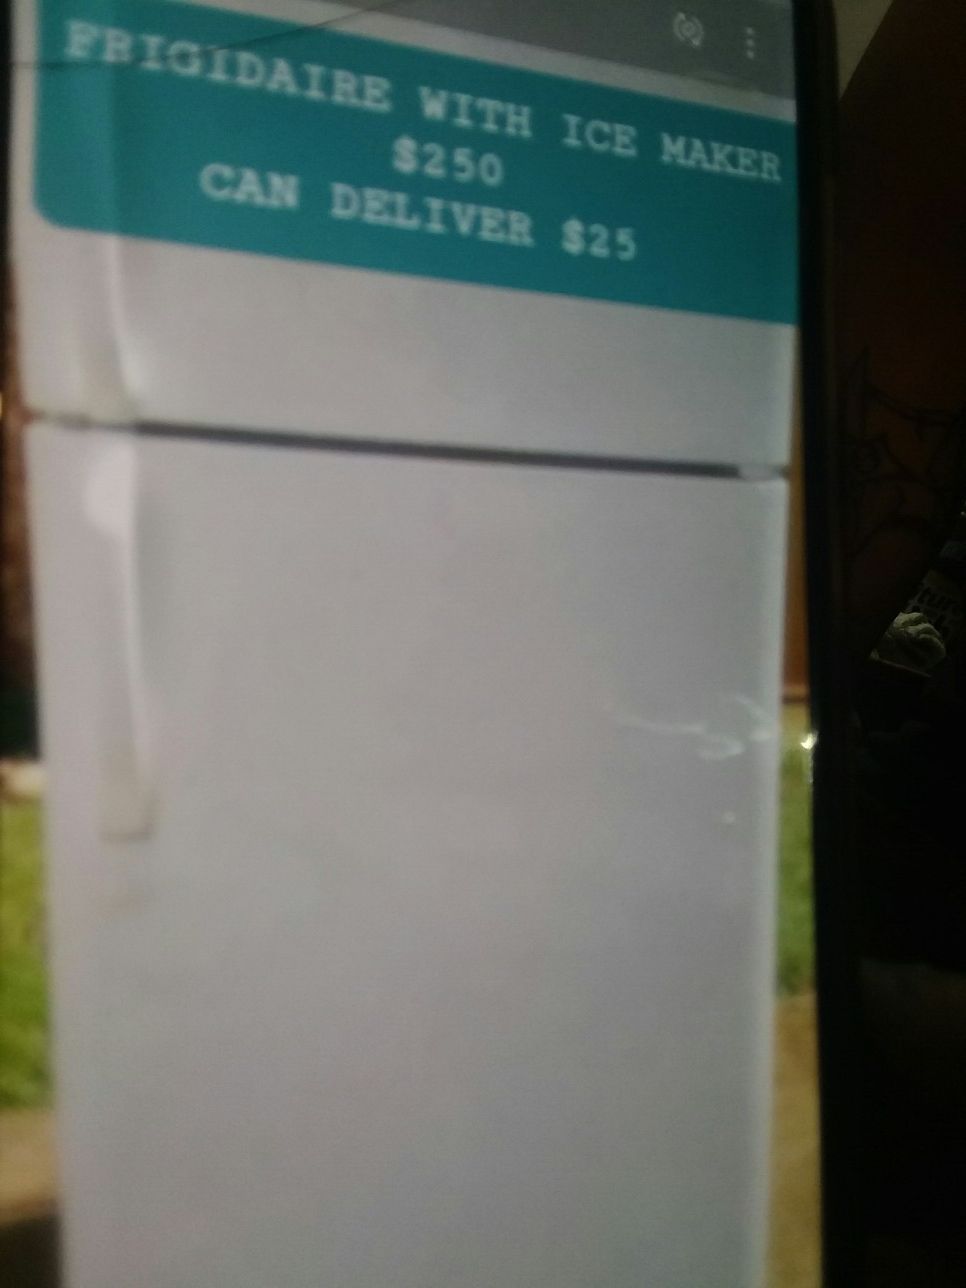 CAN DELIVER $25...EXCELLENT WORKING FRIGIDAIRE WITH ICE MAKER